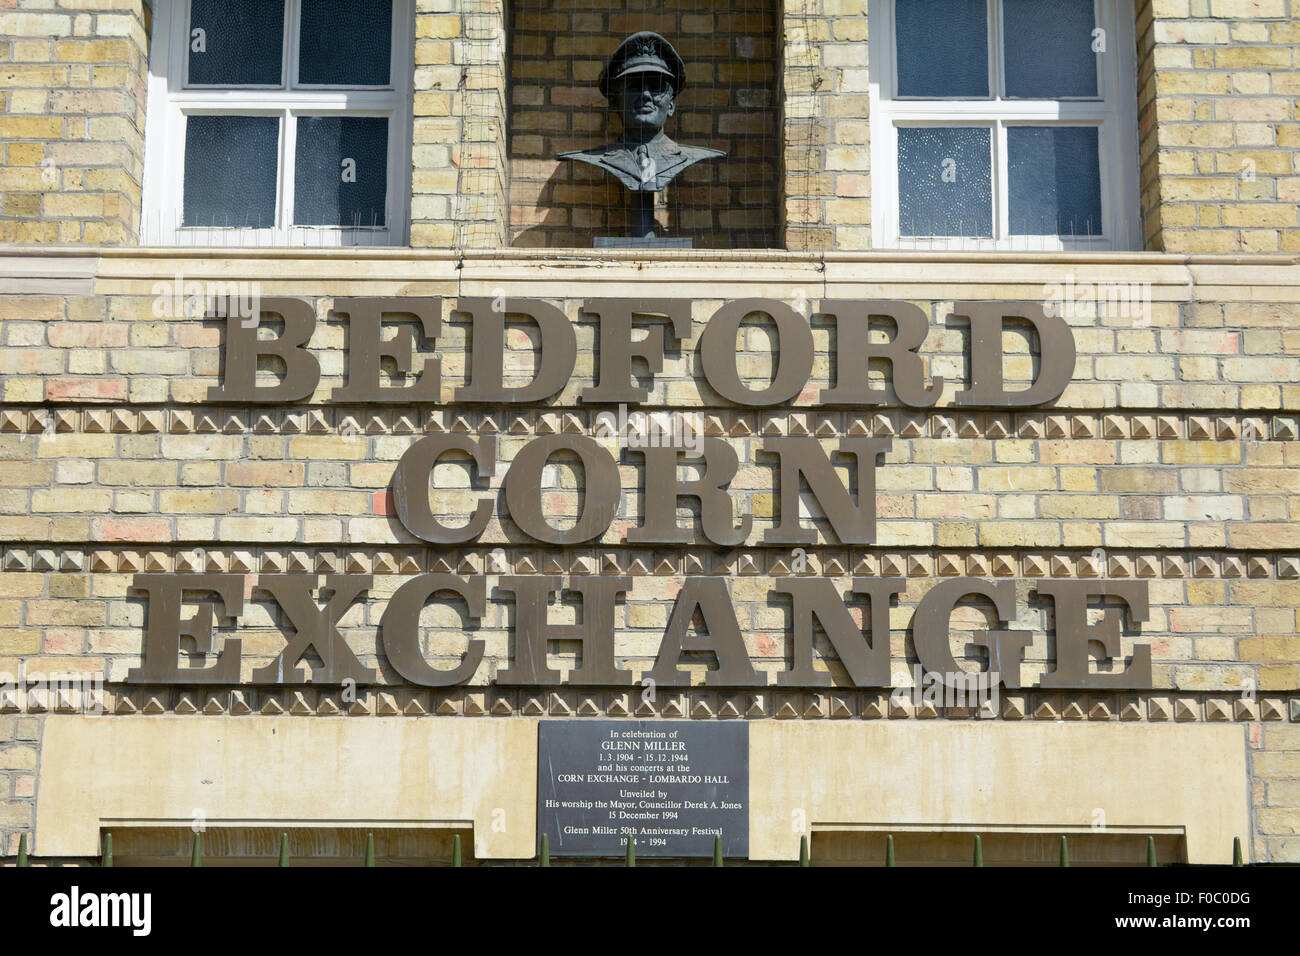 Bedford Corn Exchange with Glenn Miller bust and plaque in Bedford, Bedfordshire, England Stock Photo